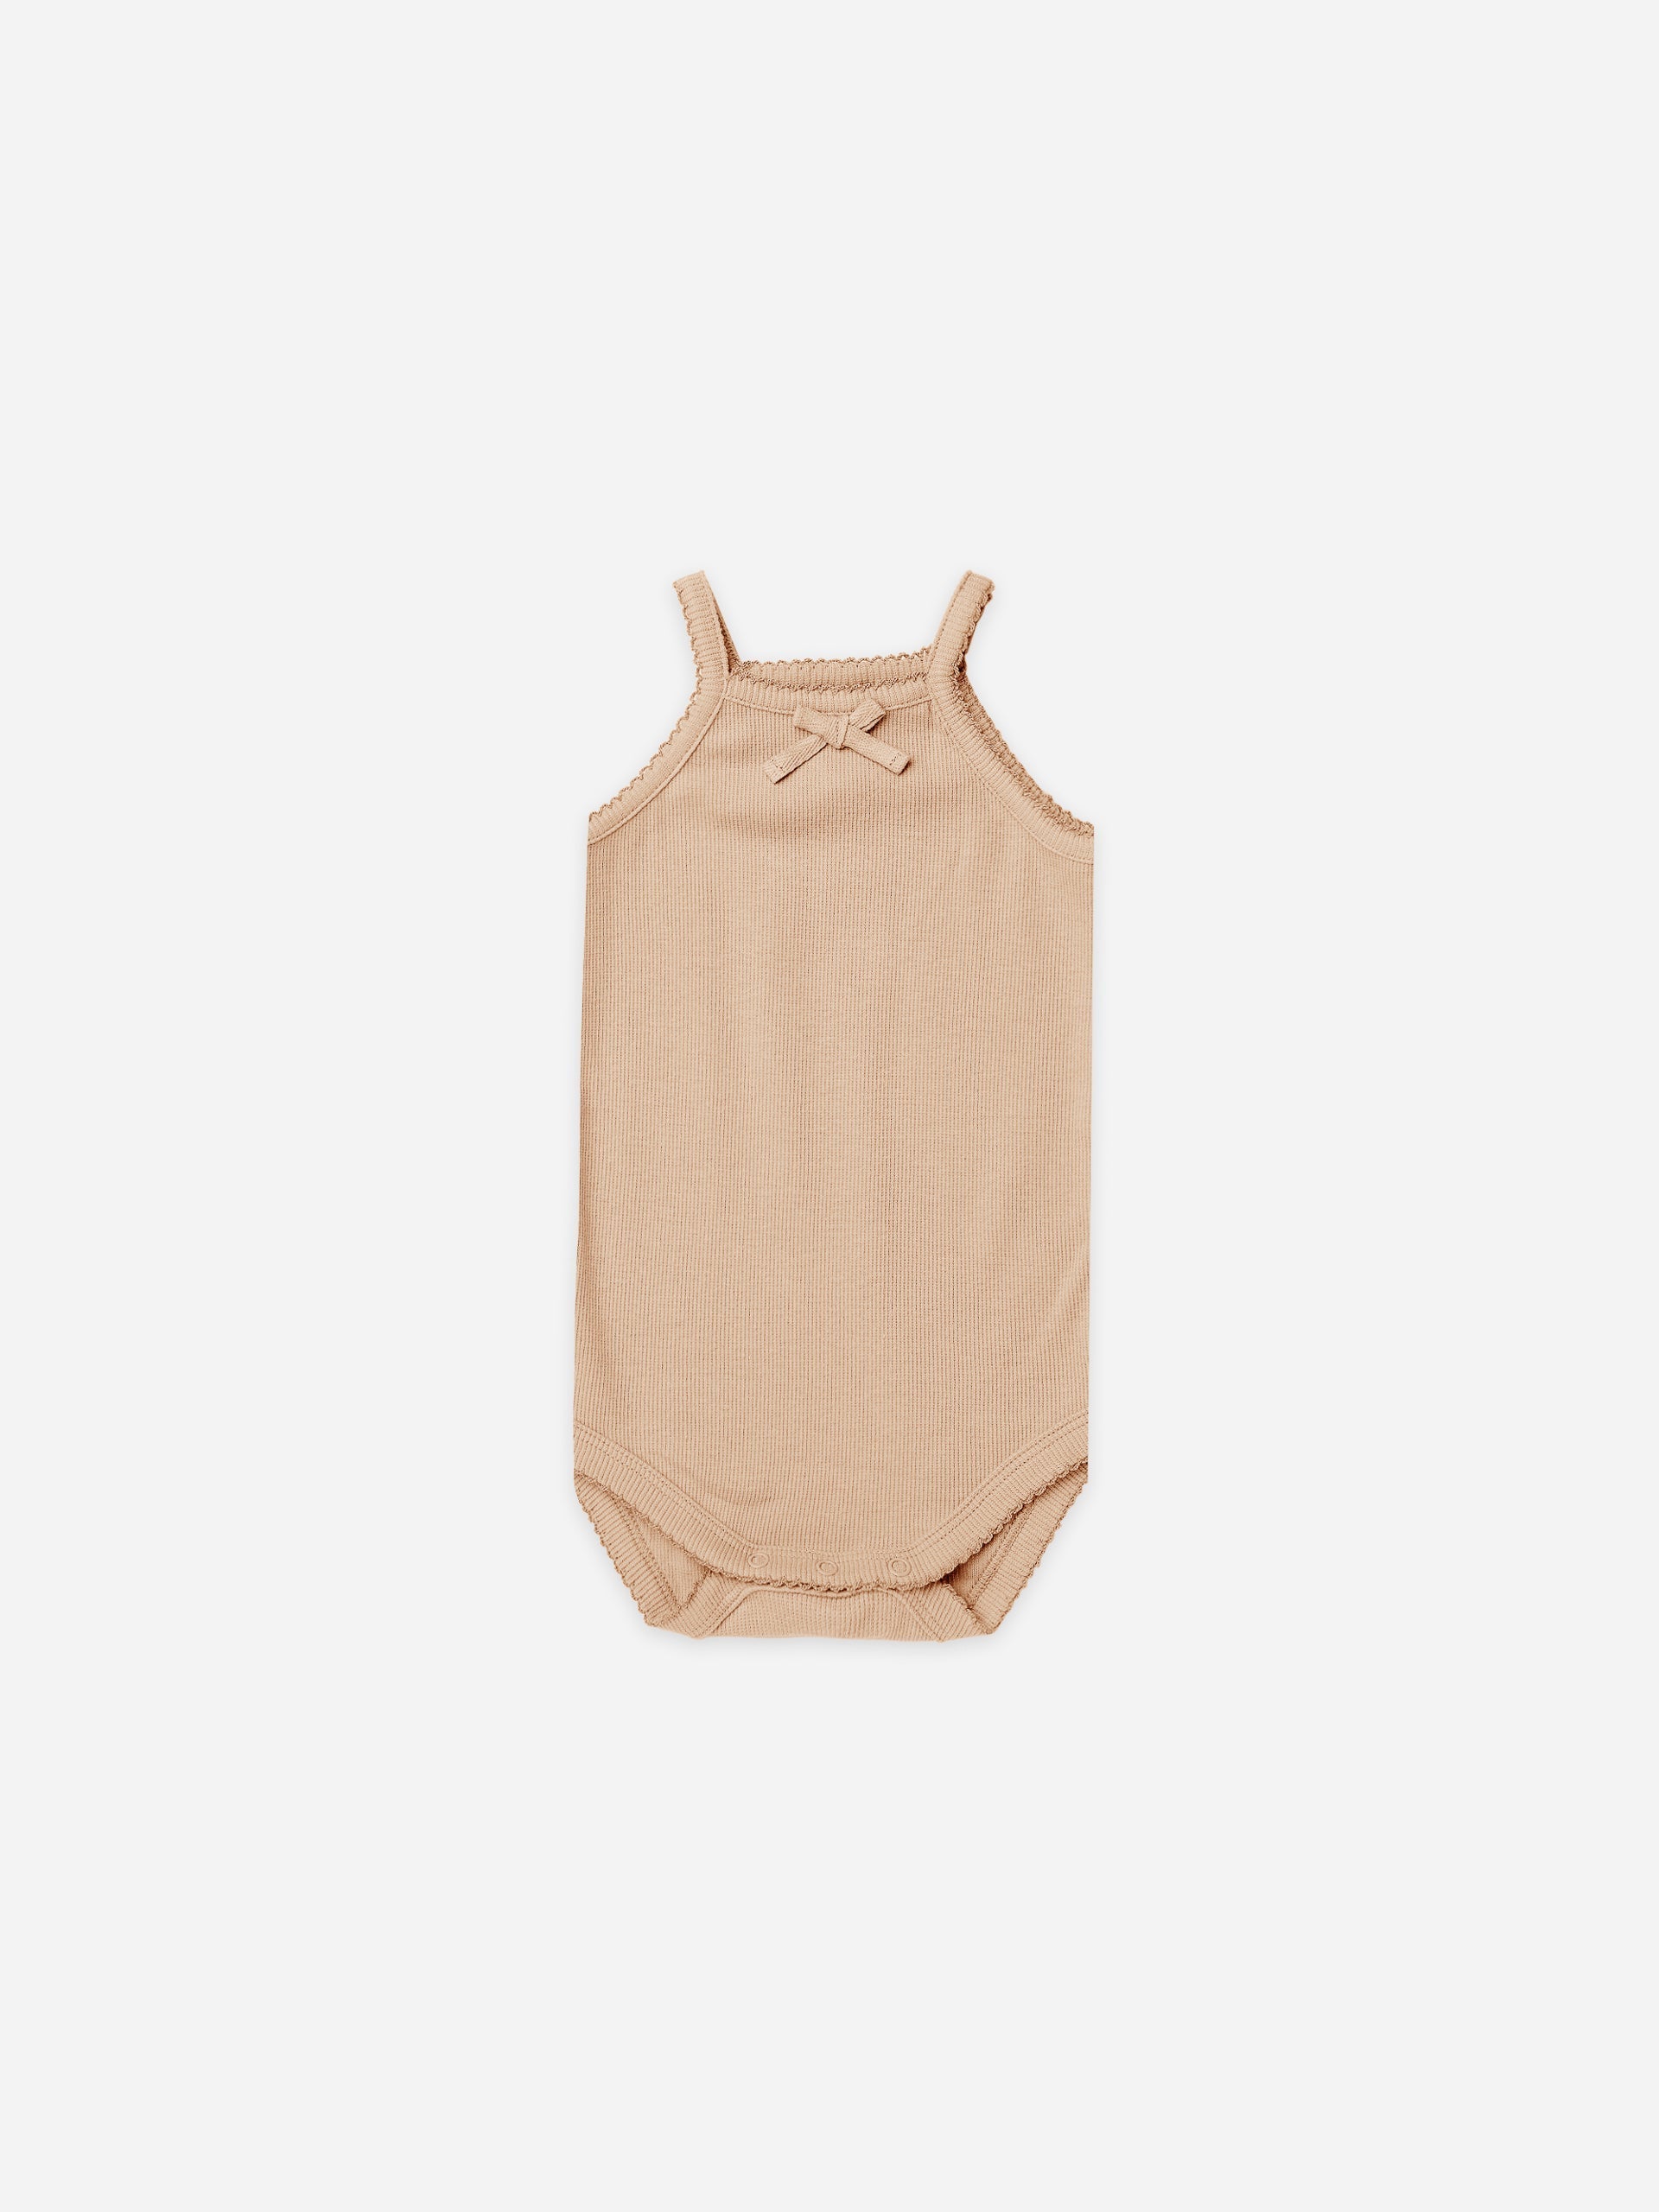 tank bodysuit | apricot - Quincy Mae | Baby Basics | Baby Clothing | Organic Baby Clothes | Modern Baby Boy Clothes |